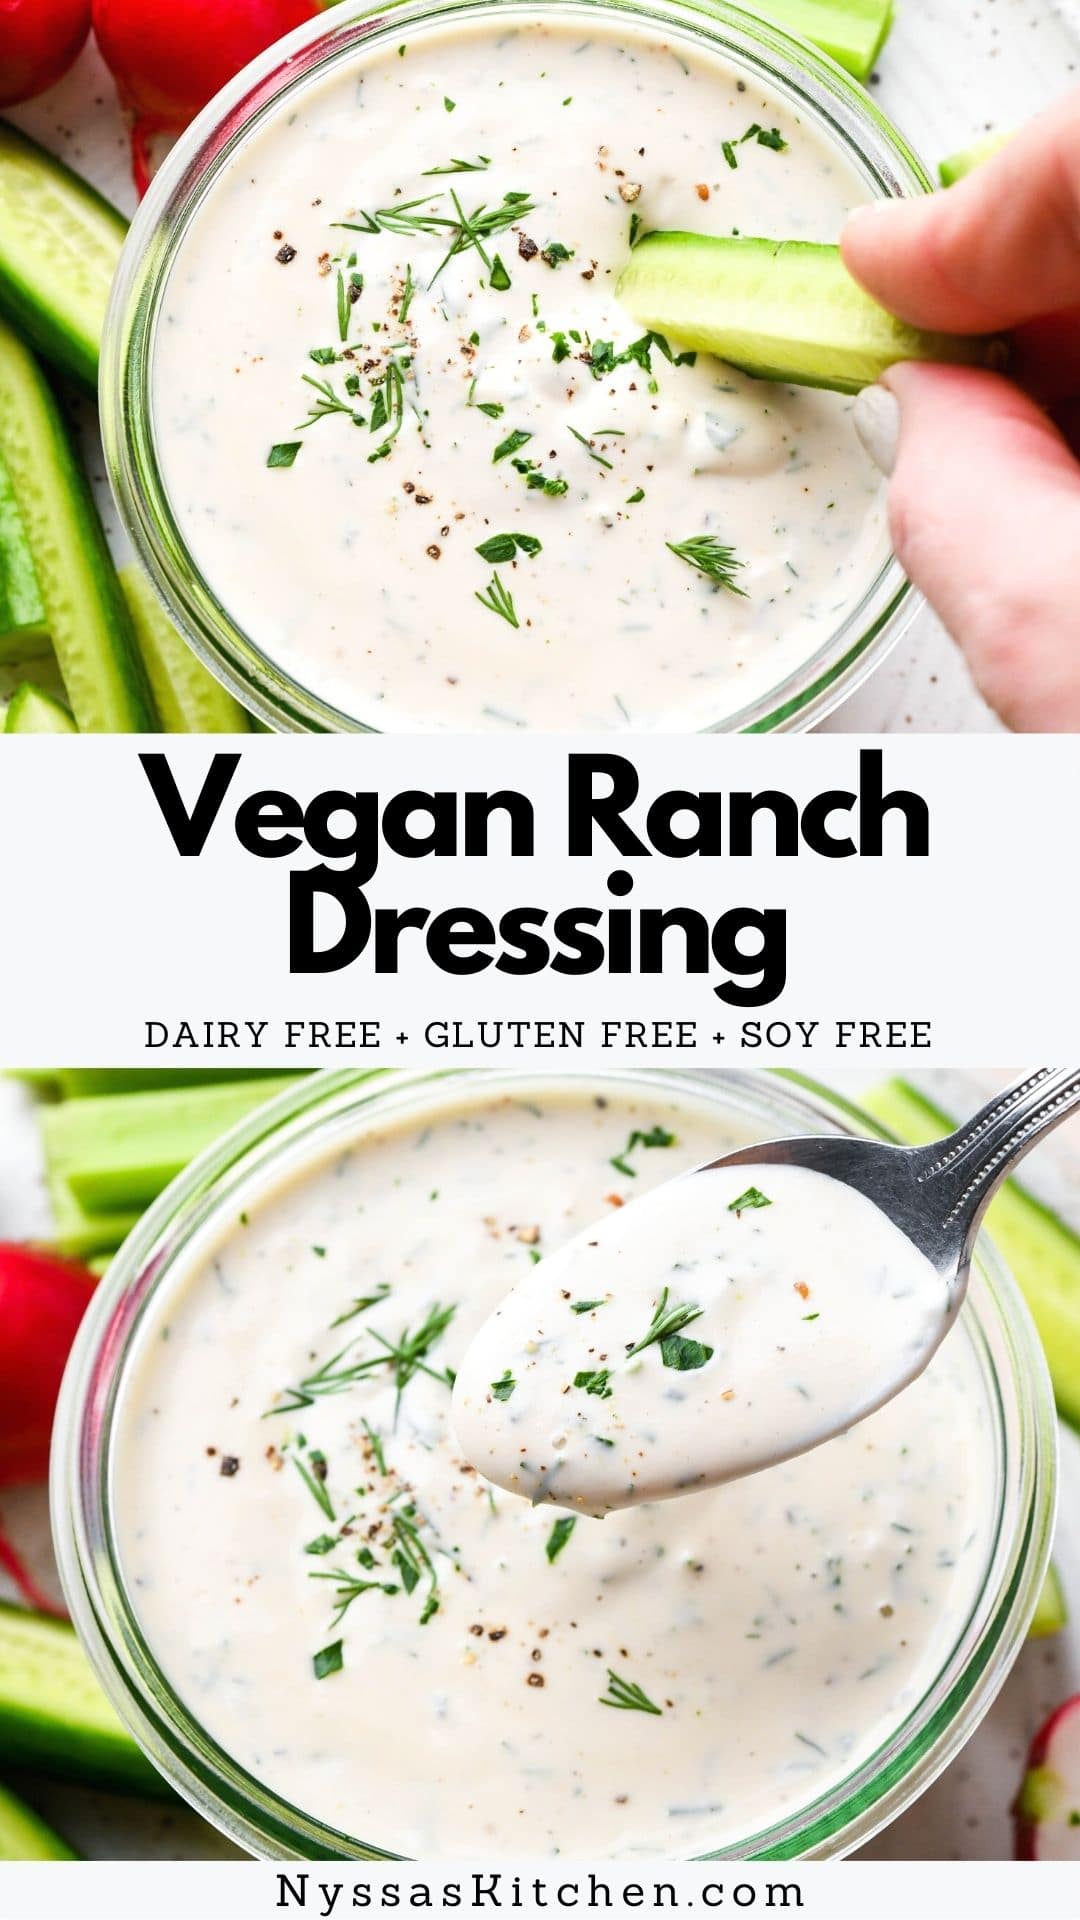 This homemade vegan ranch dressing is thick, creamy, and irresistibly tangy! Made with real plant based ingredients that you probably already have in your pantry like cashews, a simple seasoning blend, and herbs. A perfect dip for fries, veggies, pizza, burgers, or as a delicious salad dressing! Vegan, vegetarian, Whole30, paleo, raw, oil free, dairy free, soy free, and gluten free.